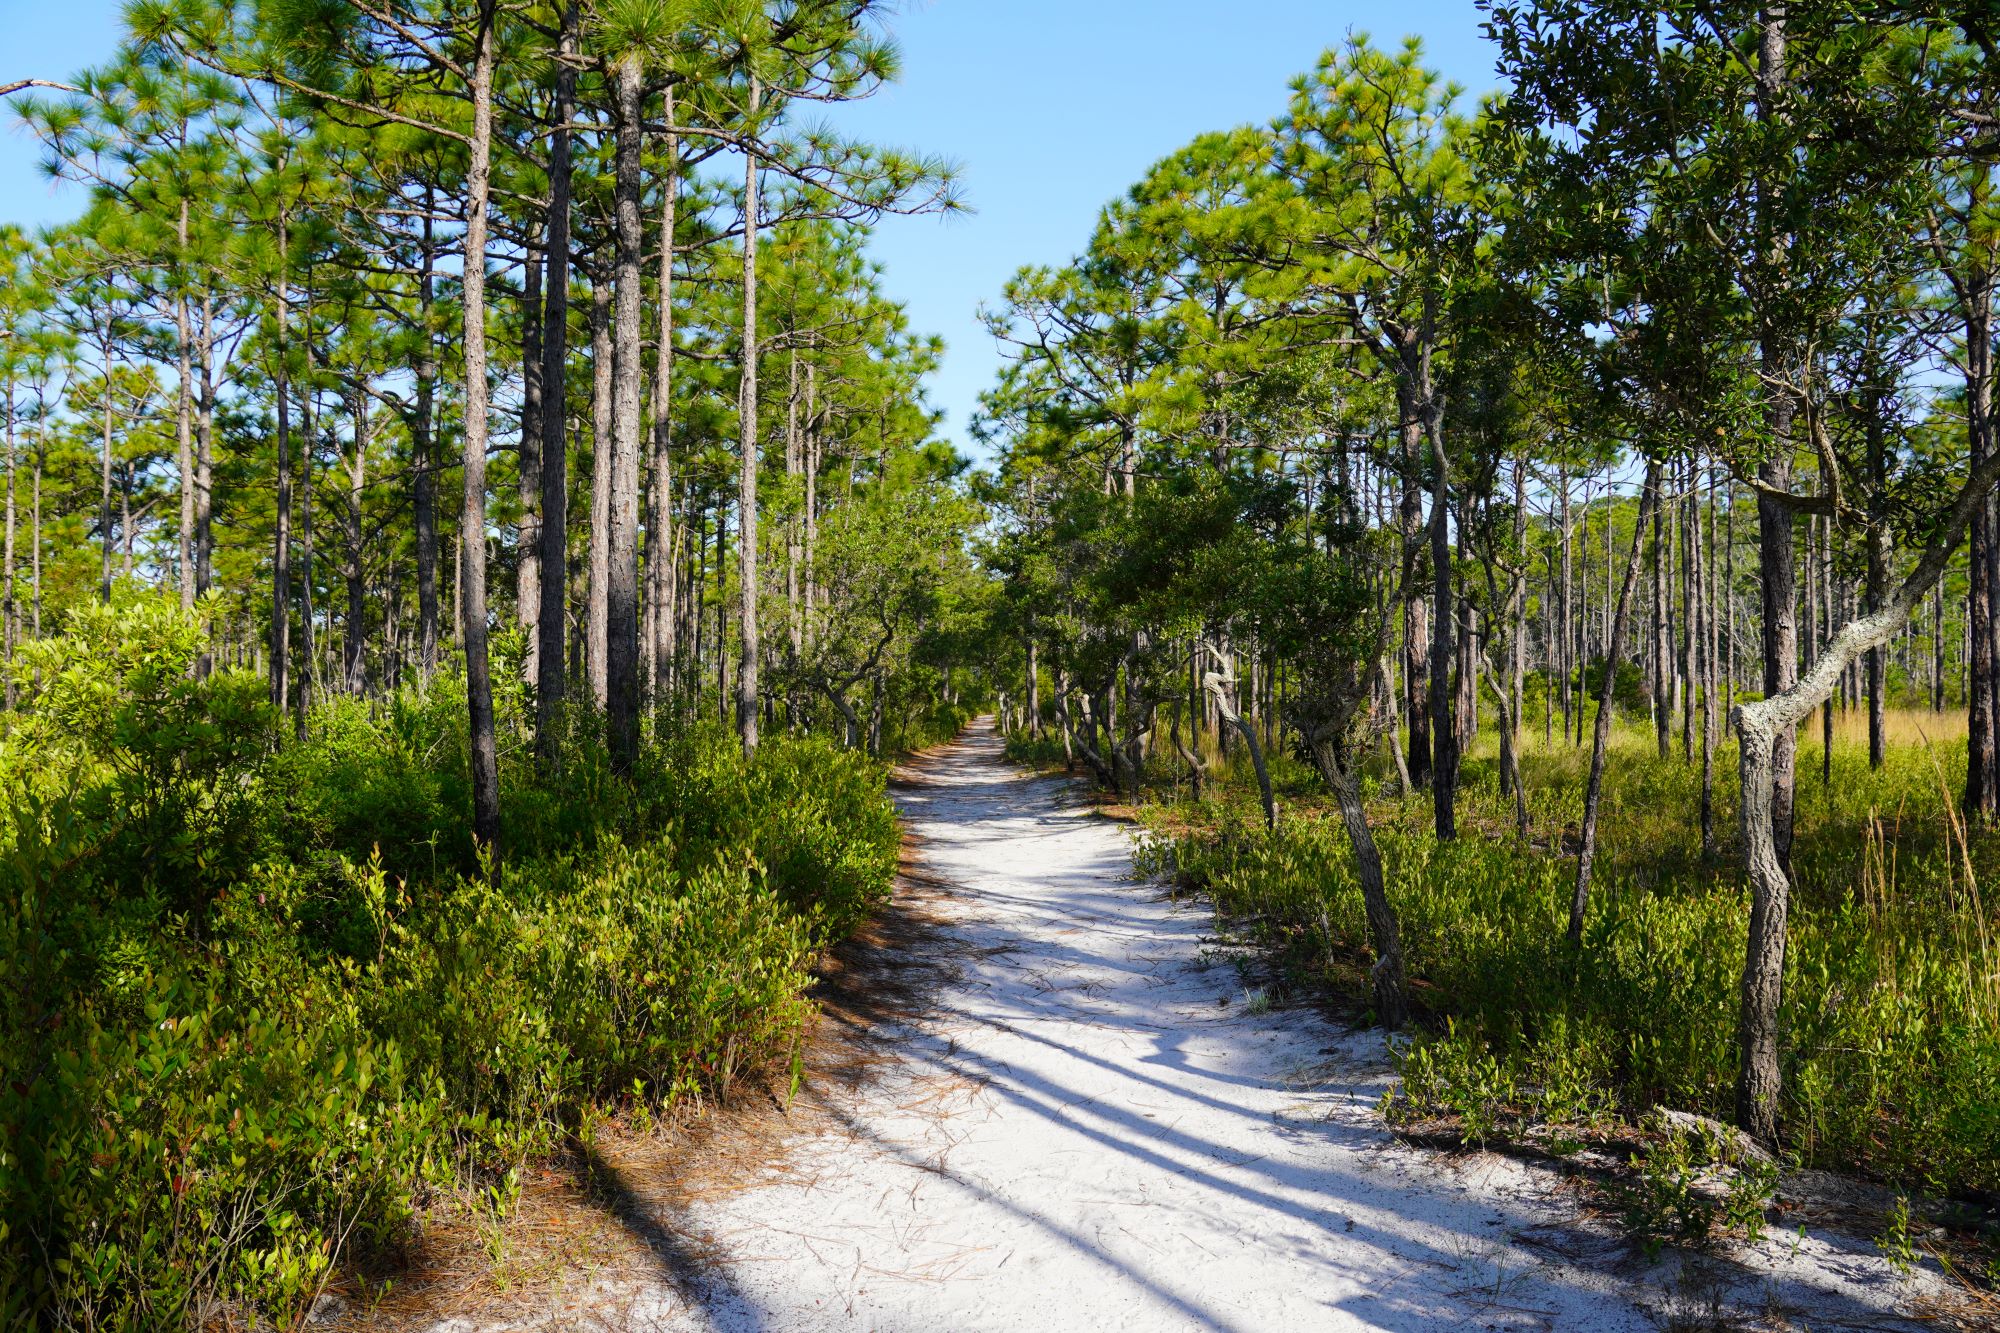 longleaf pine forests are common in the south